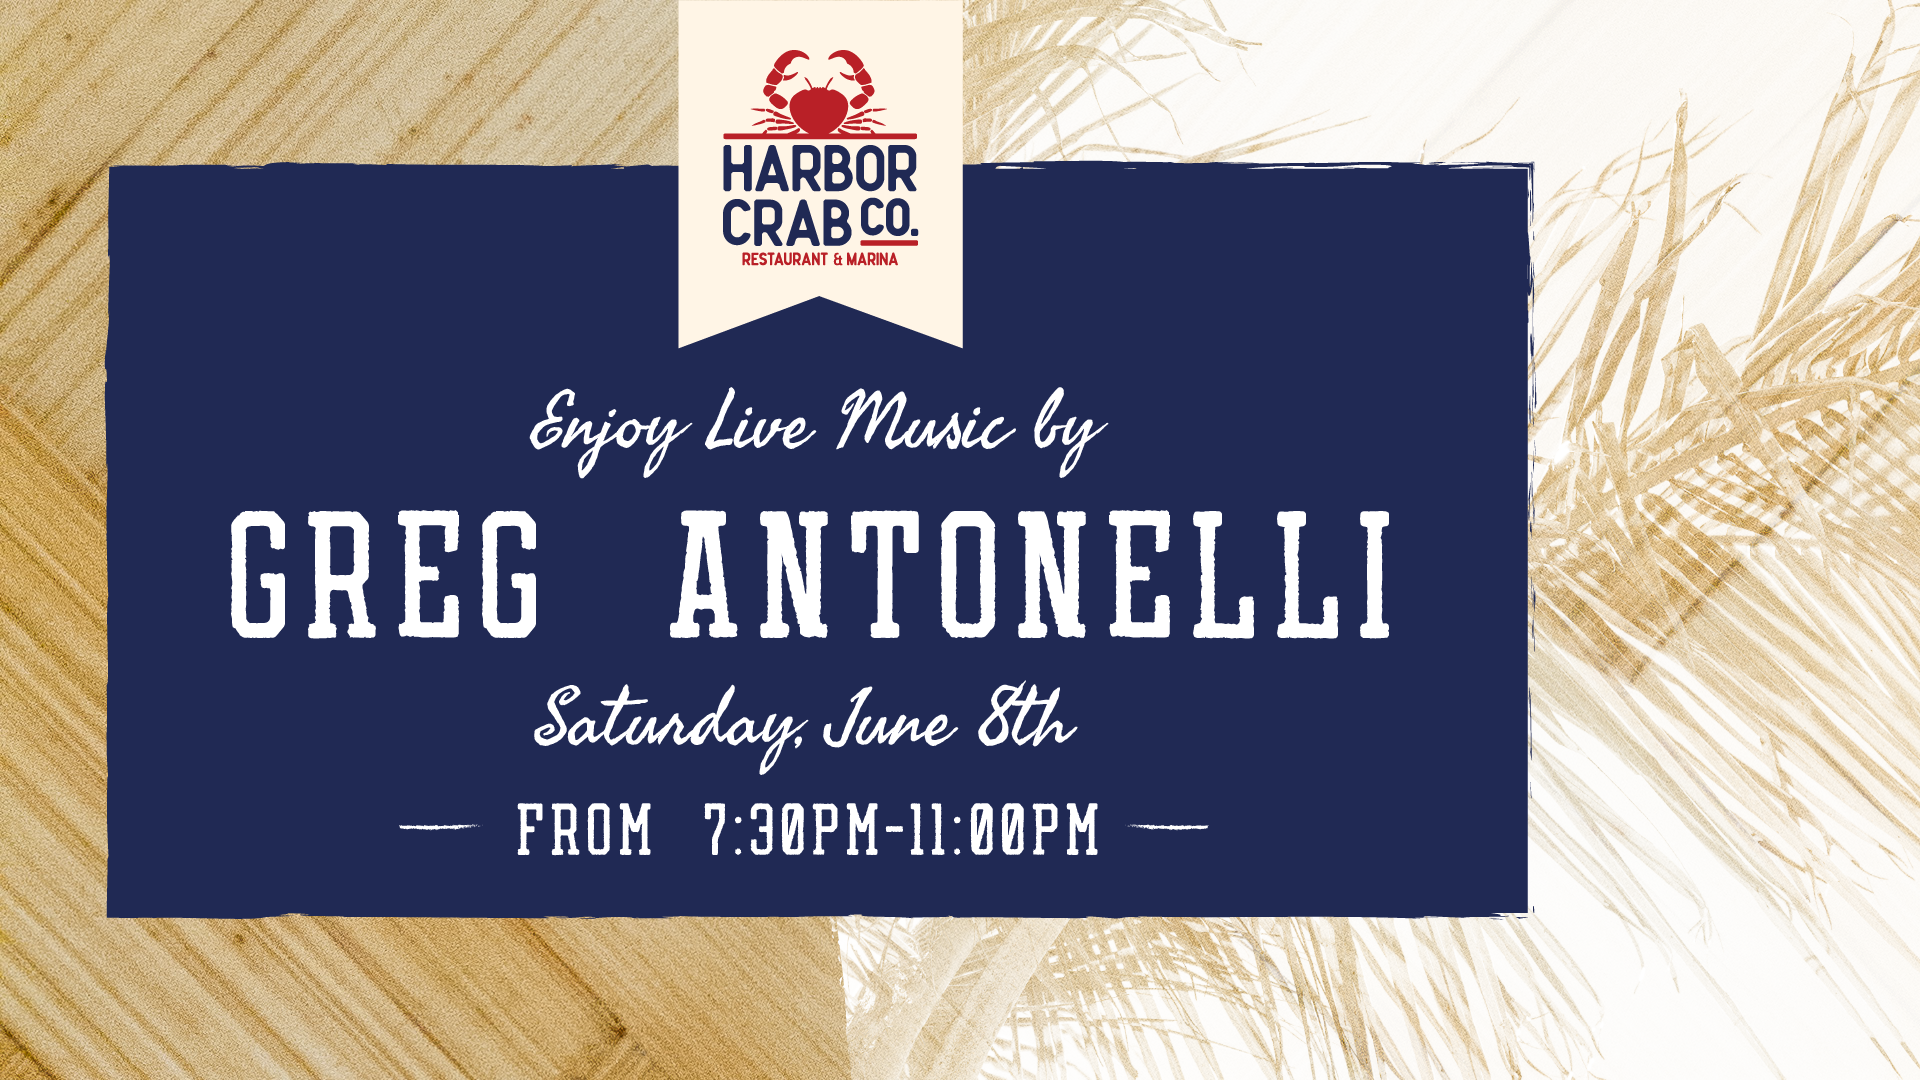 Live music by Greg Antonelli at Harbor Crab on June 8th from 7:30pm-11pm.